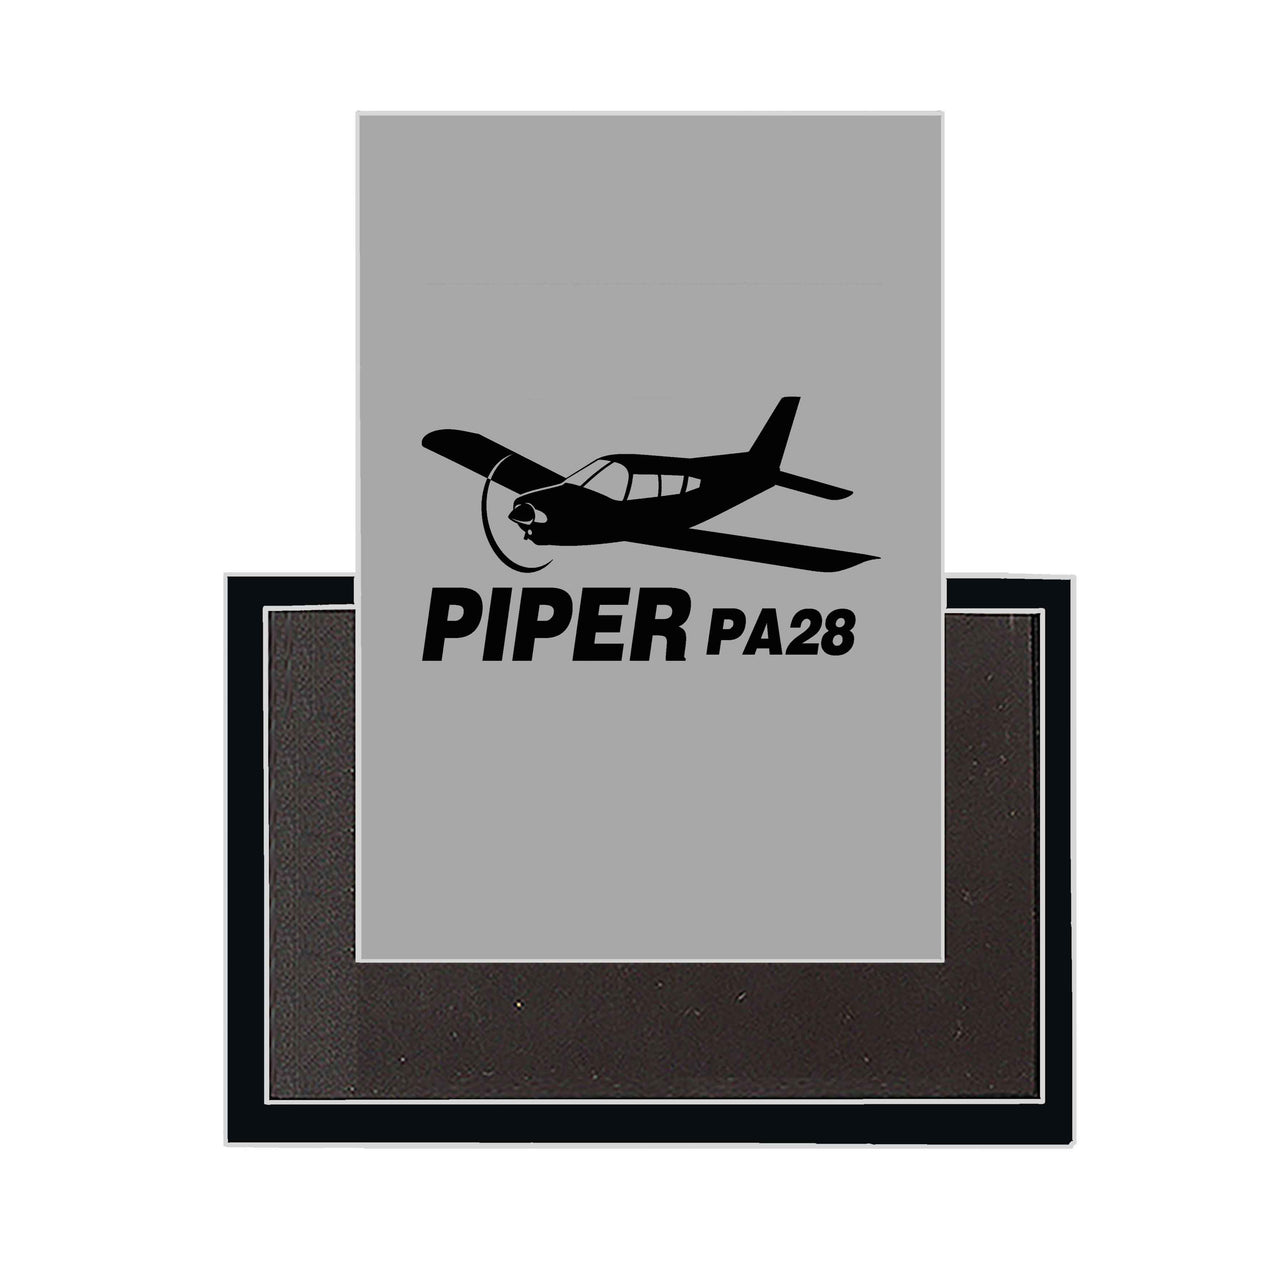 The Piper PA28 Designed Magnets